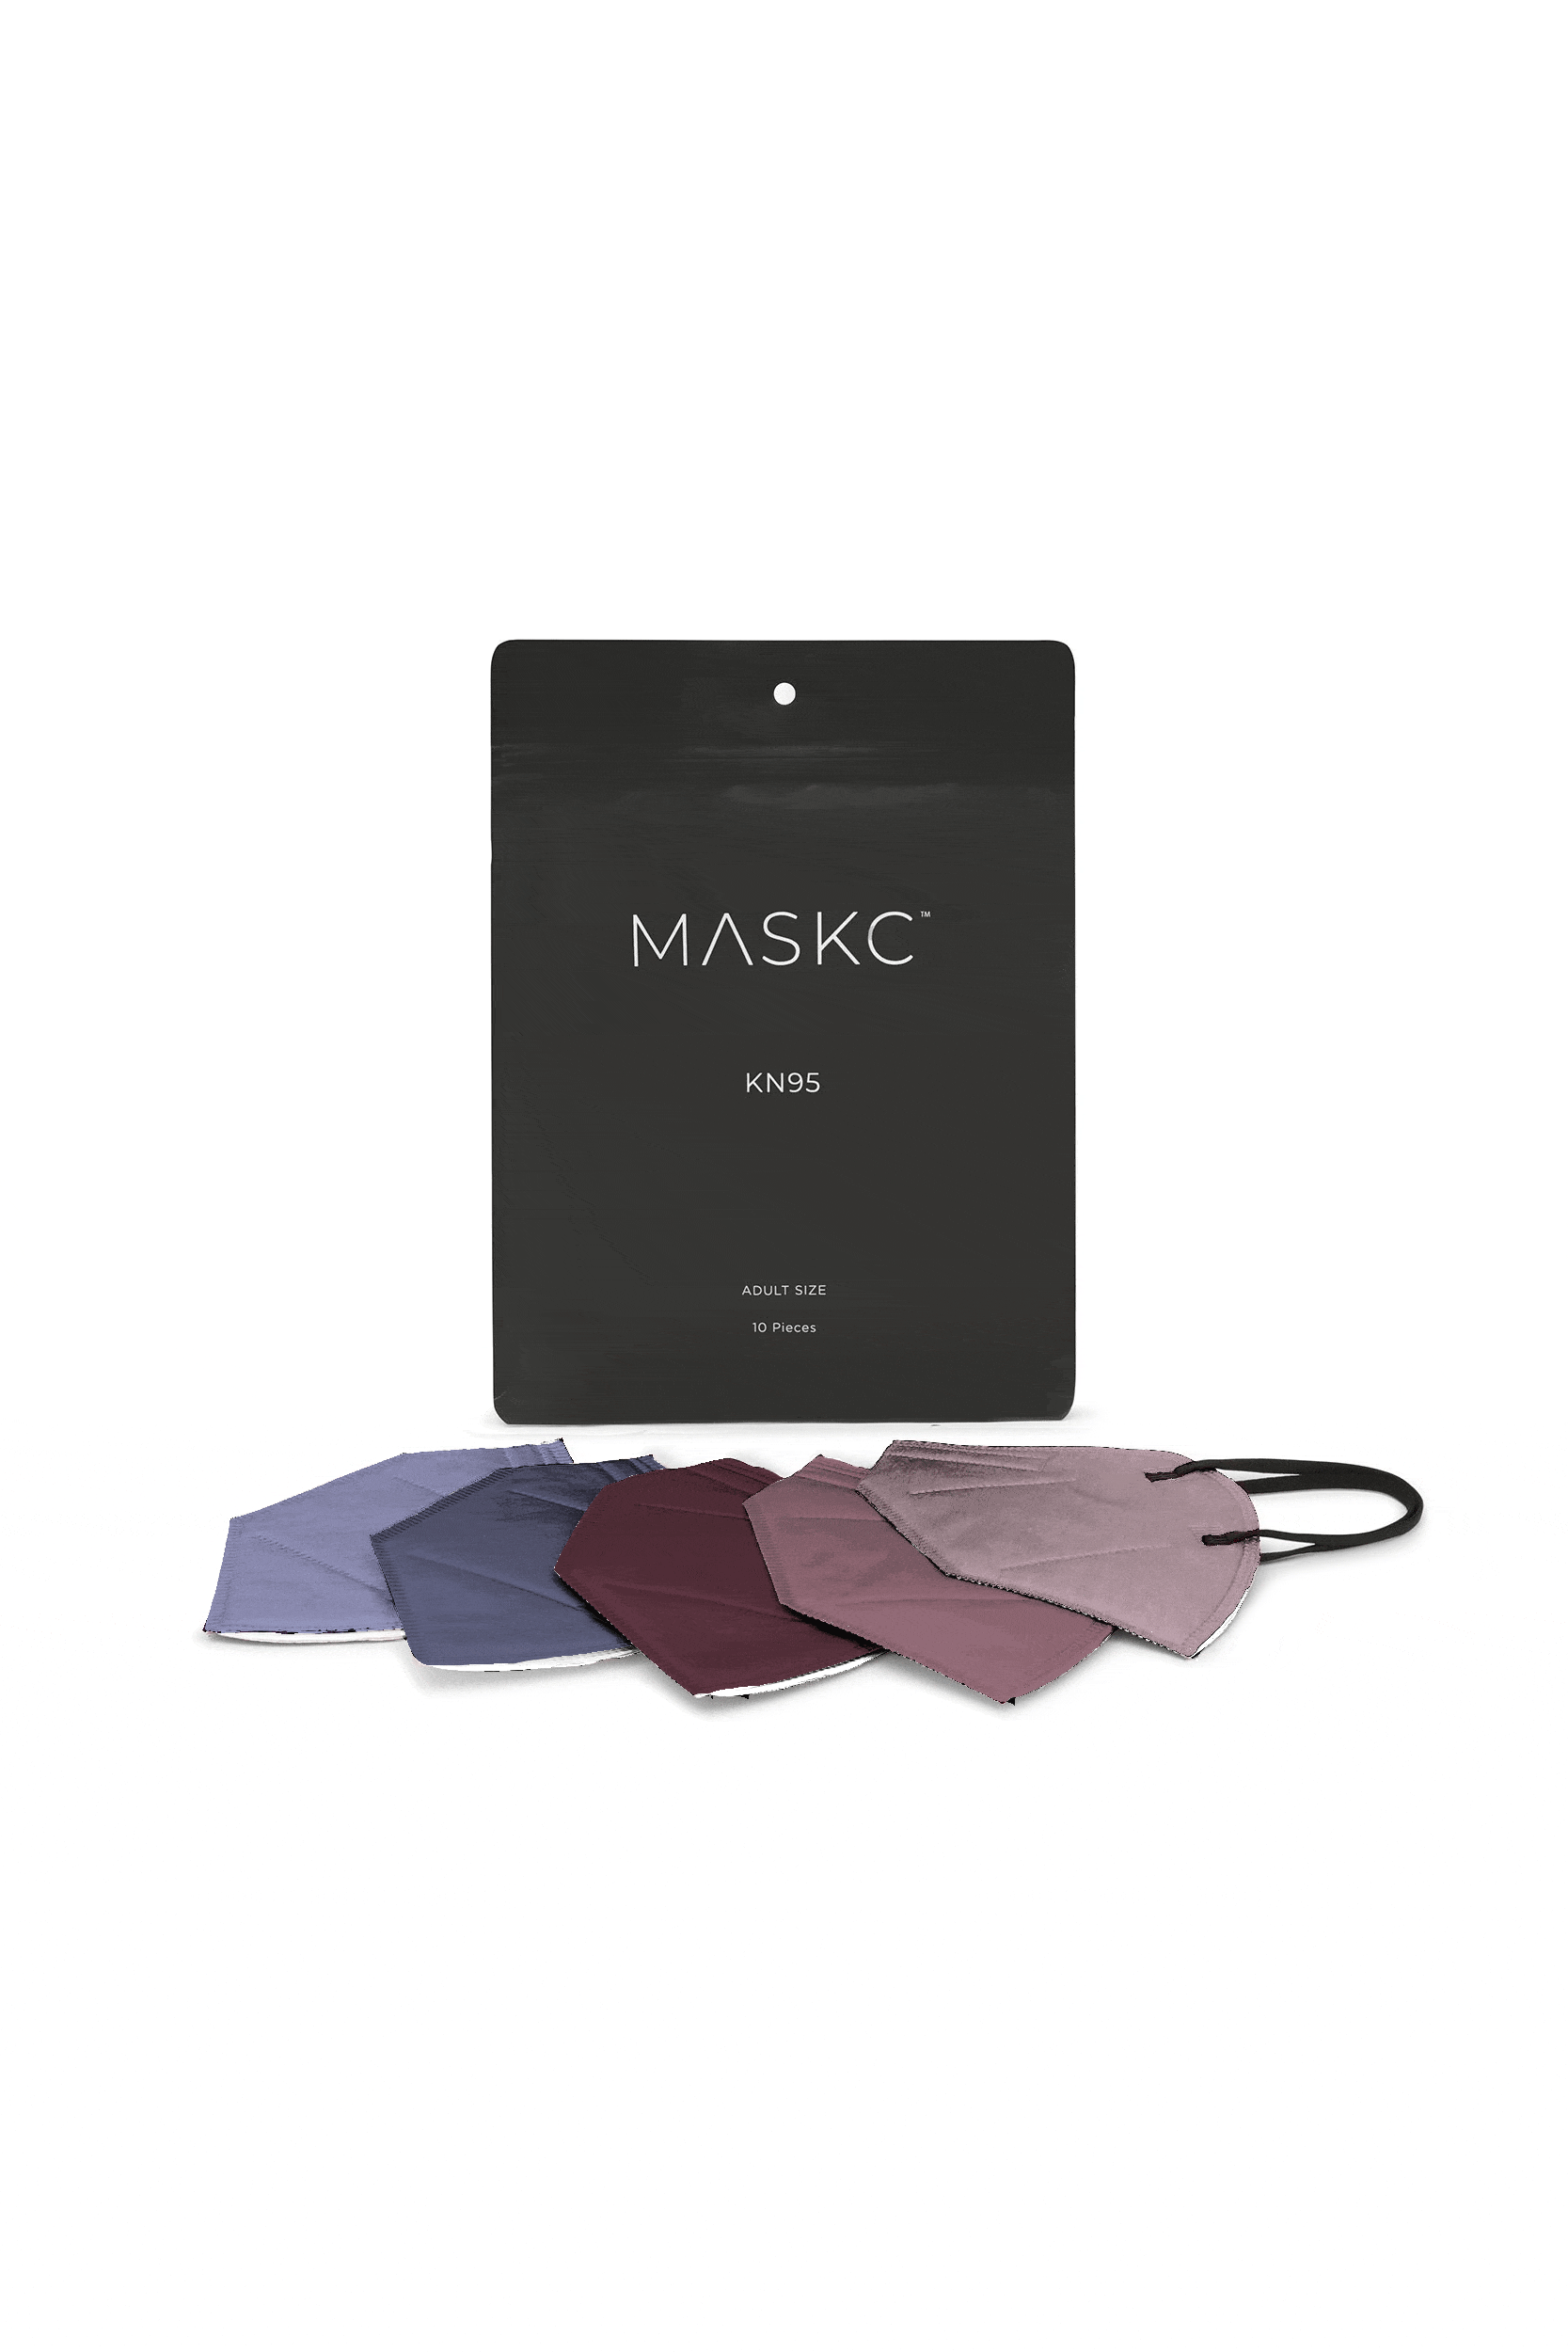 Pack of Purple Hue KN95 face masks. Each pack contains stylish high quality face masks. 